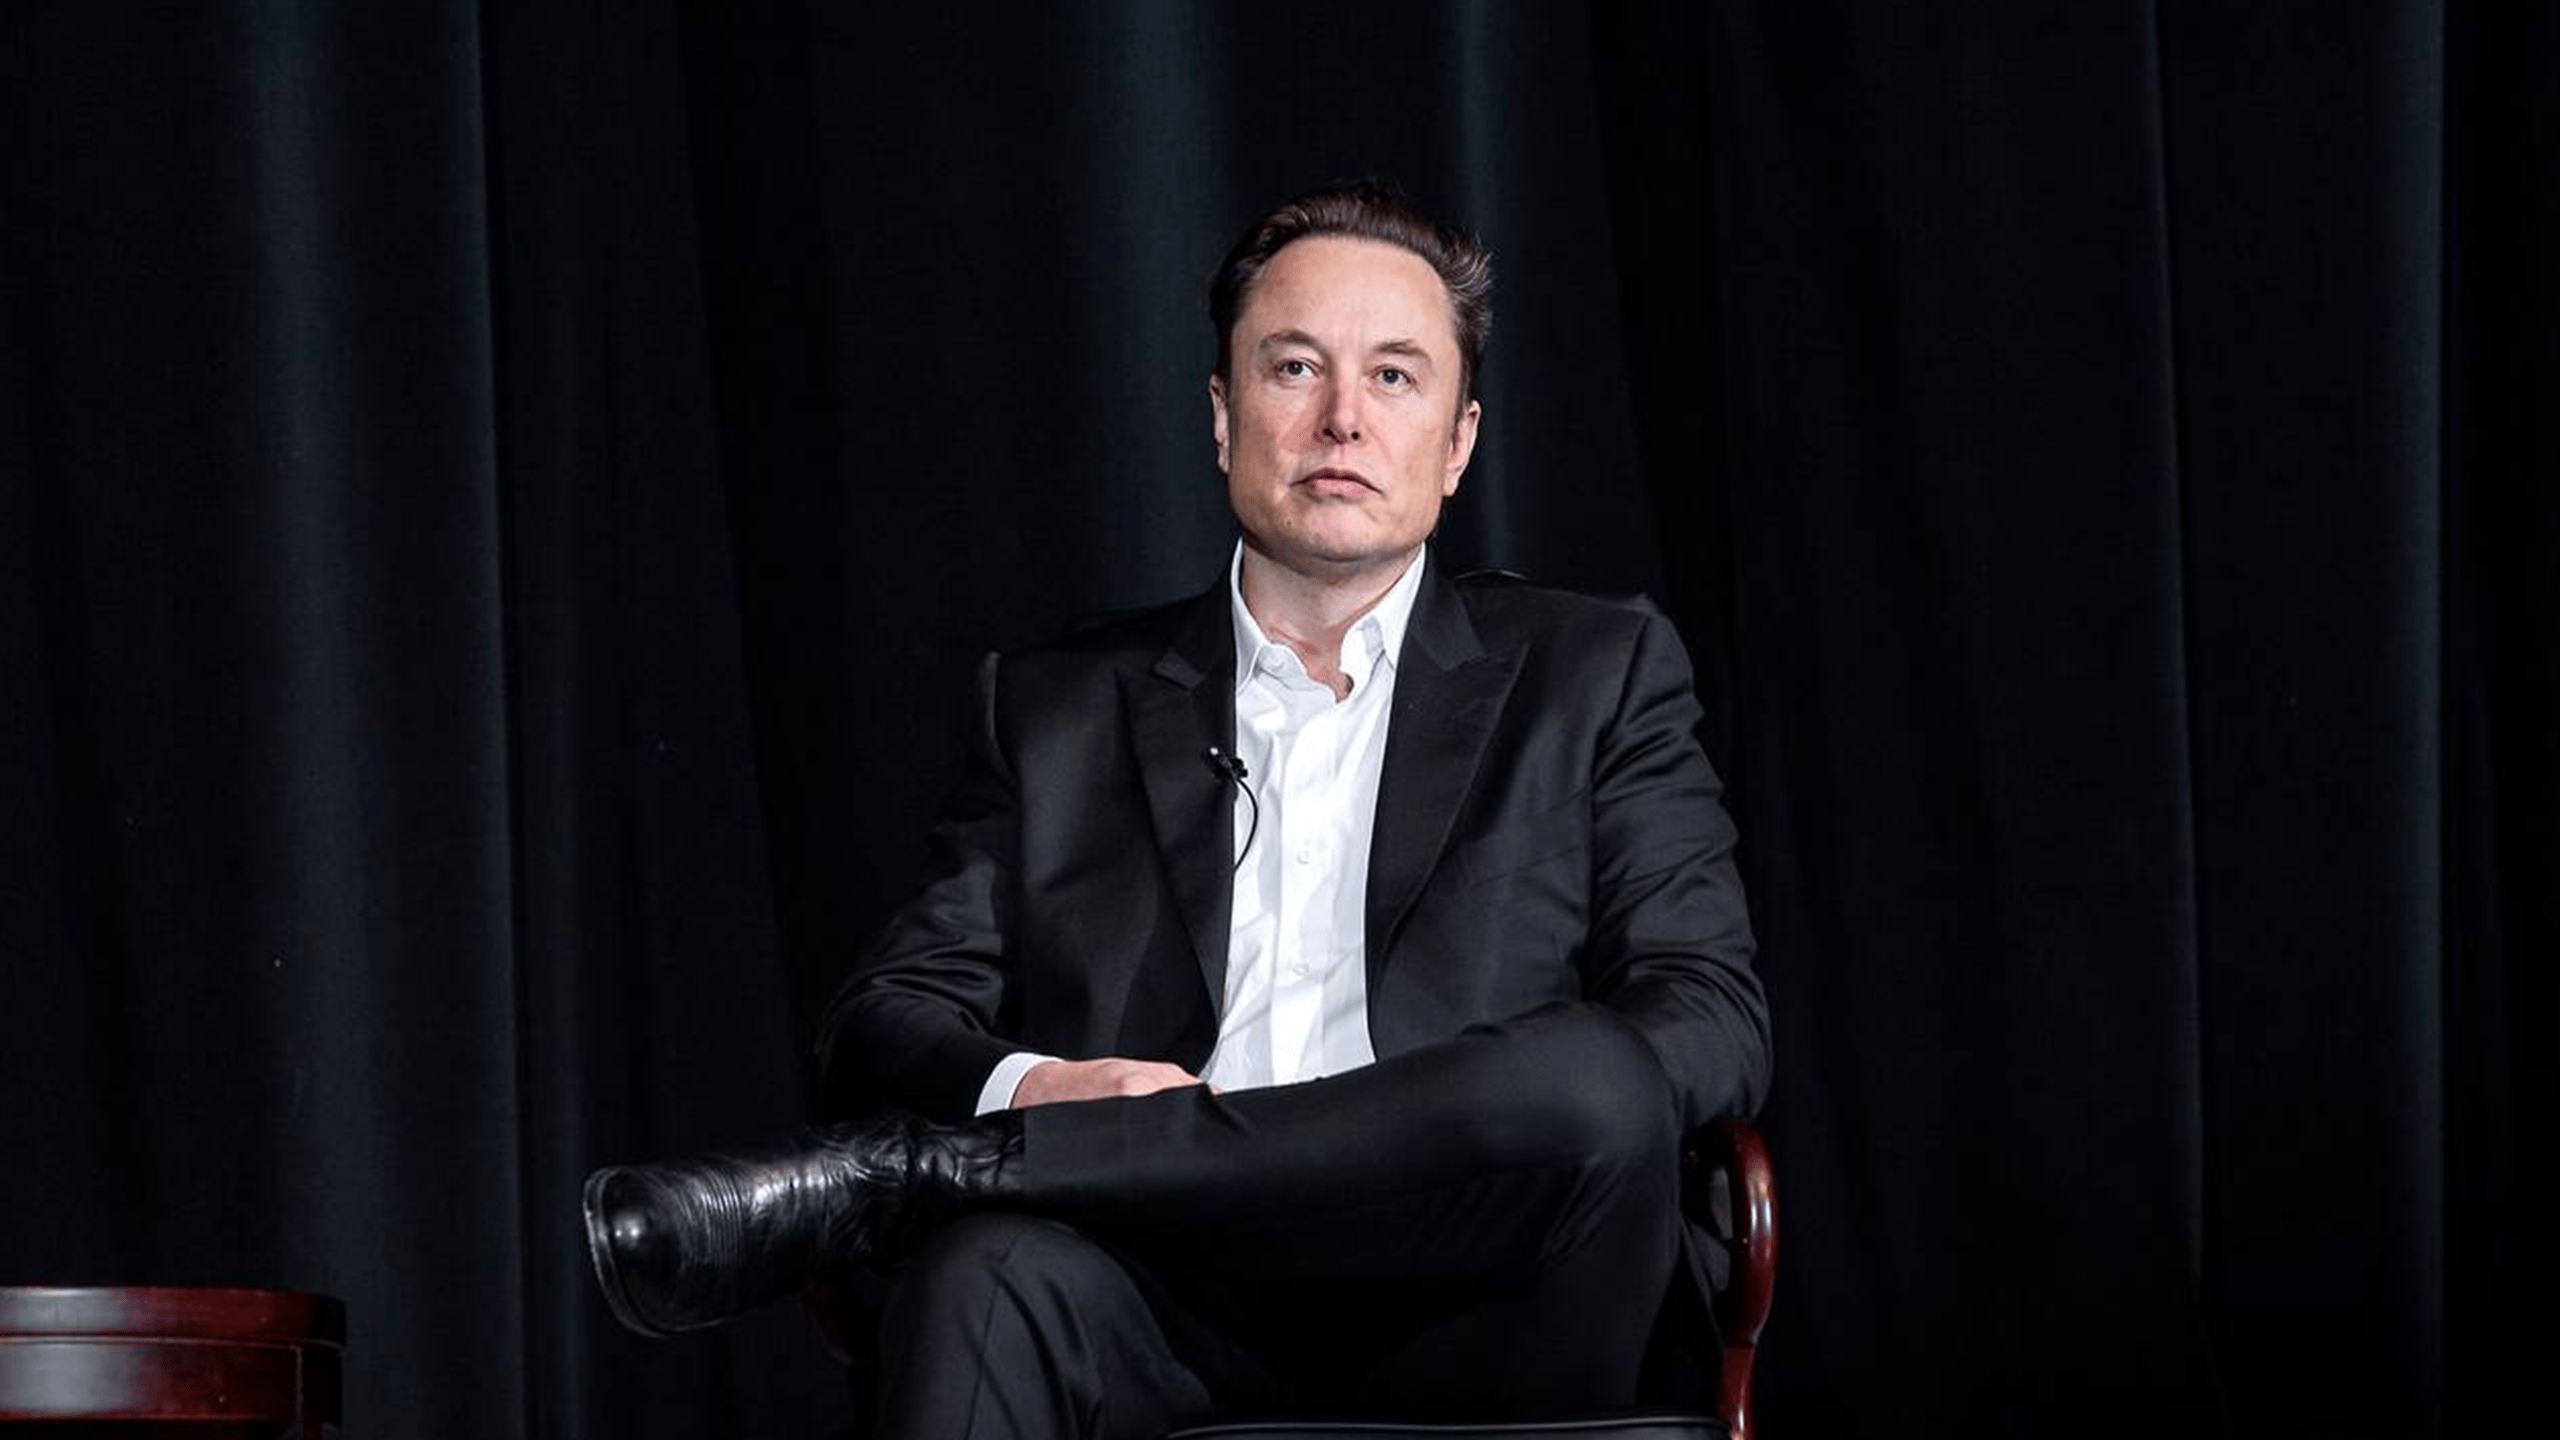 A recent surge of resignations slams Twitter after Musk's injunction